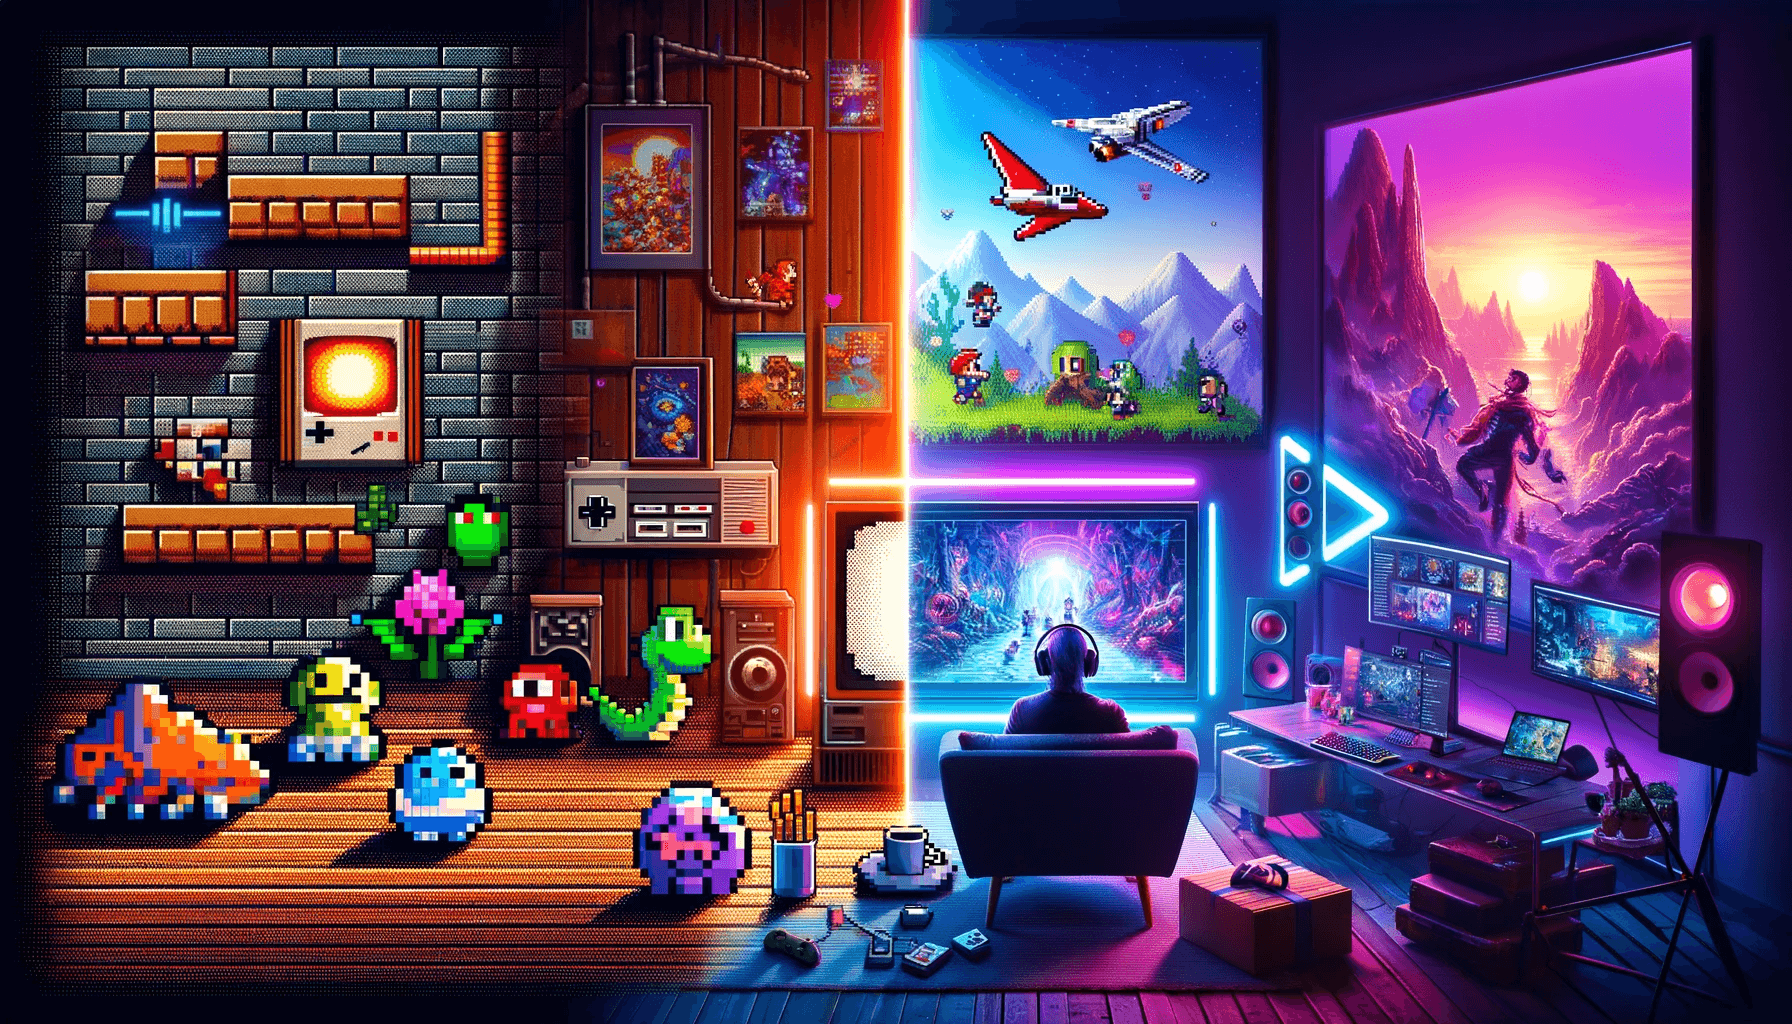 Progression from old-school pixelated gaming to high-definition influencer-driven gaming experiences.